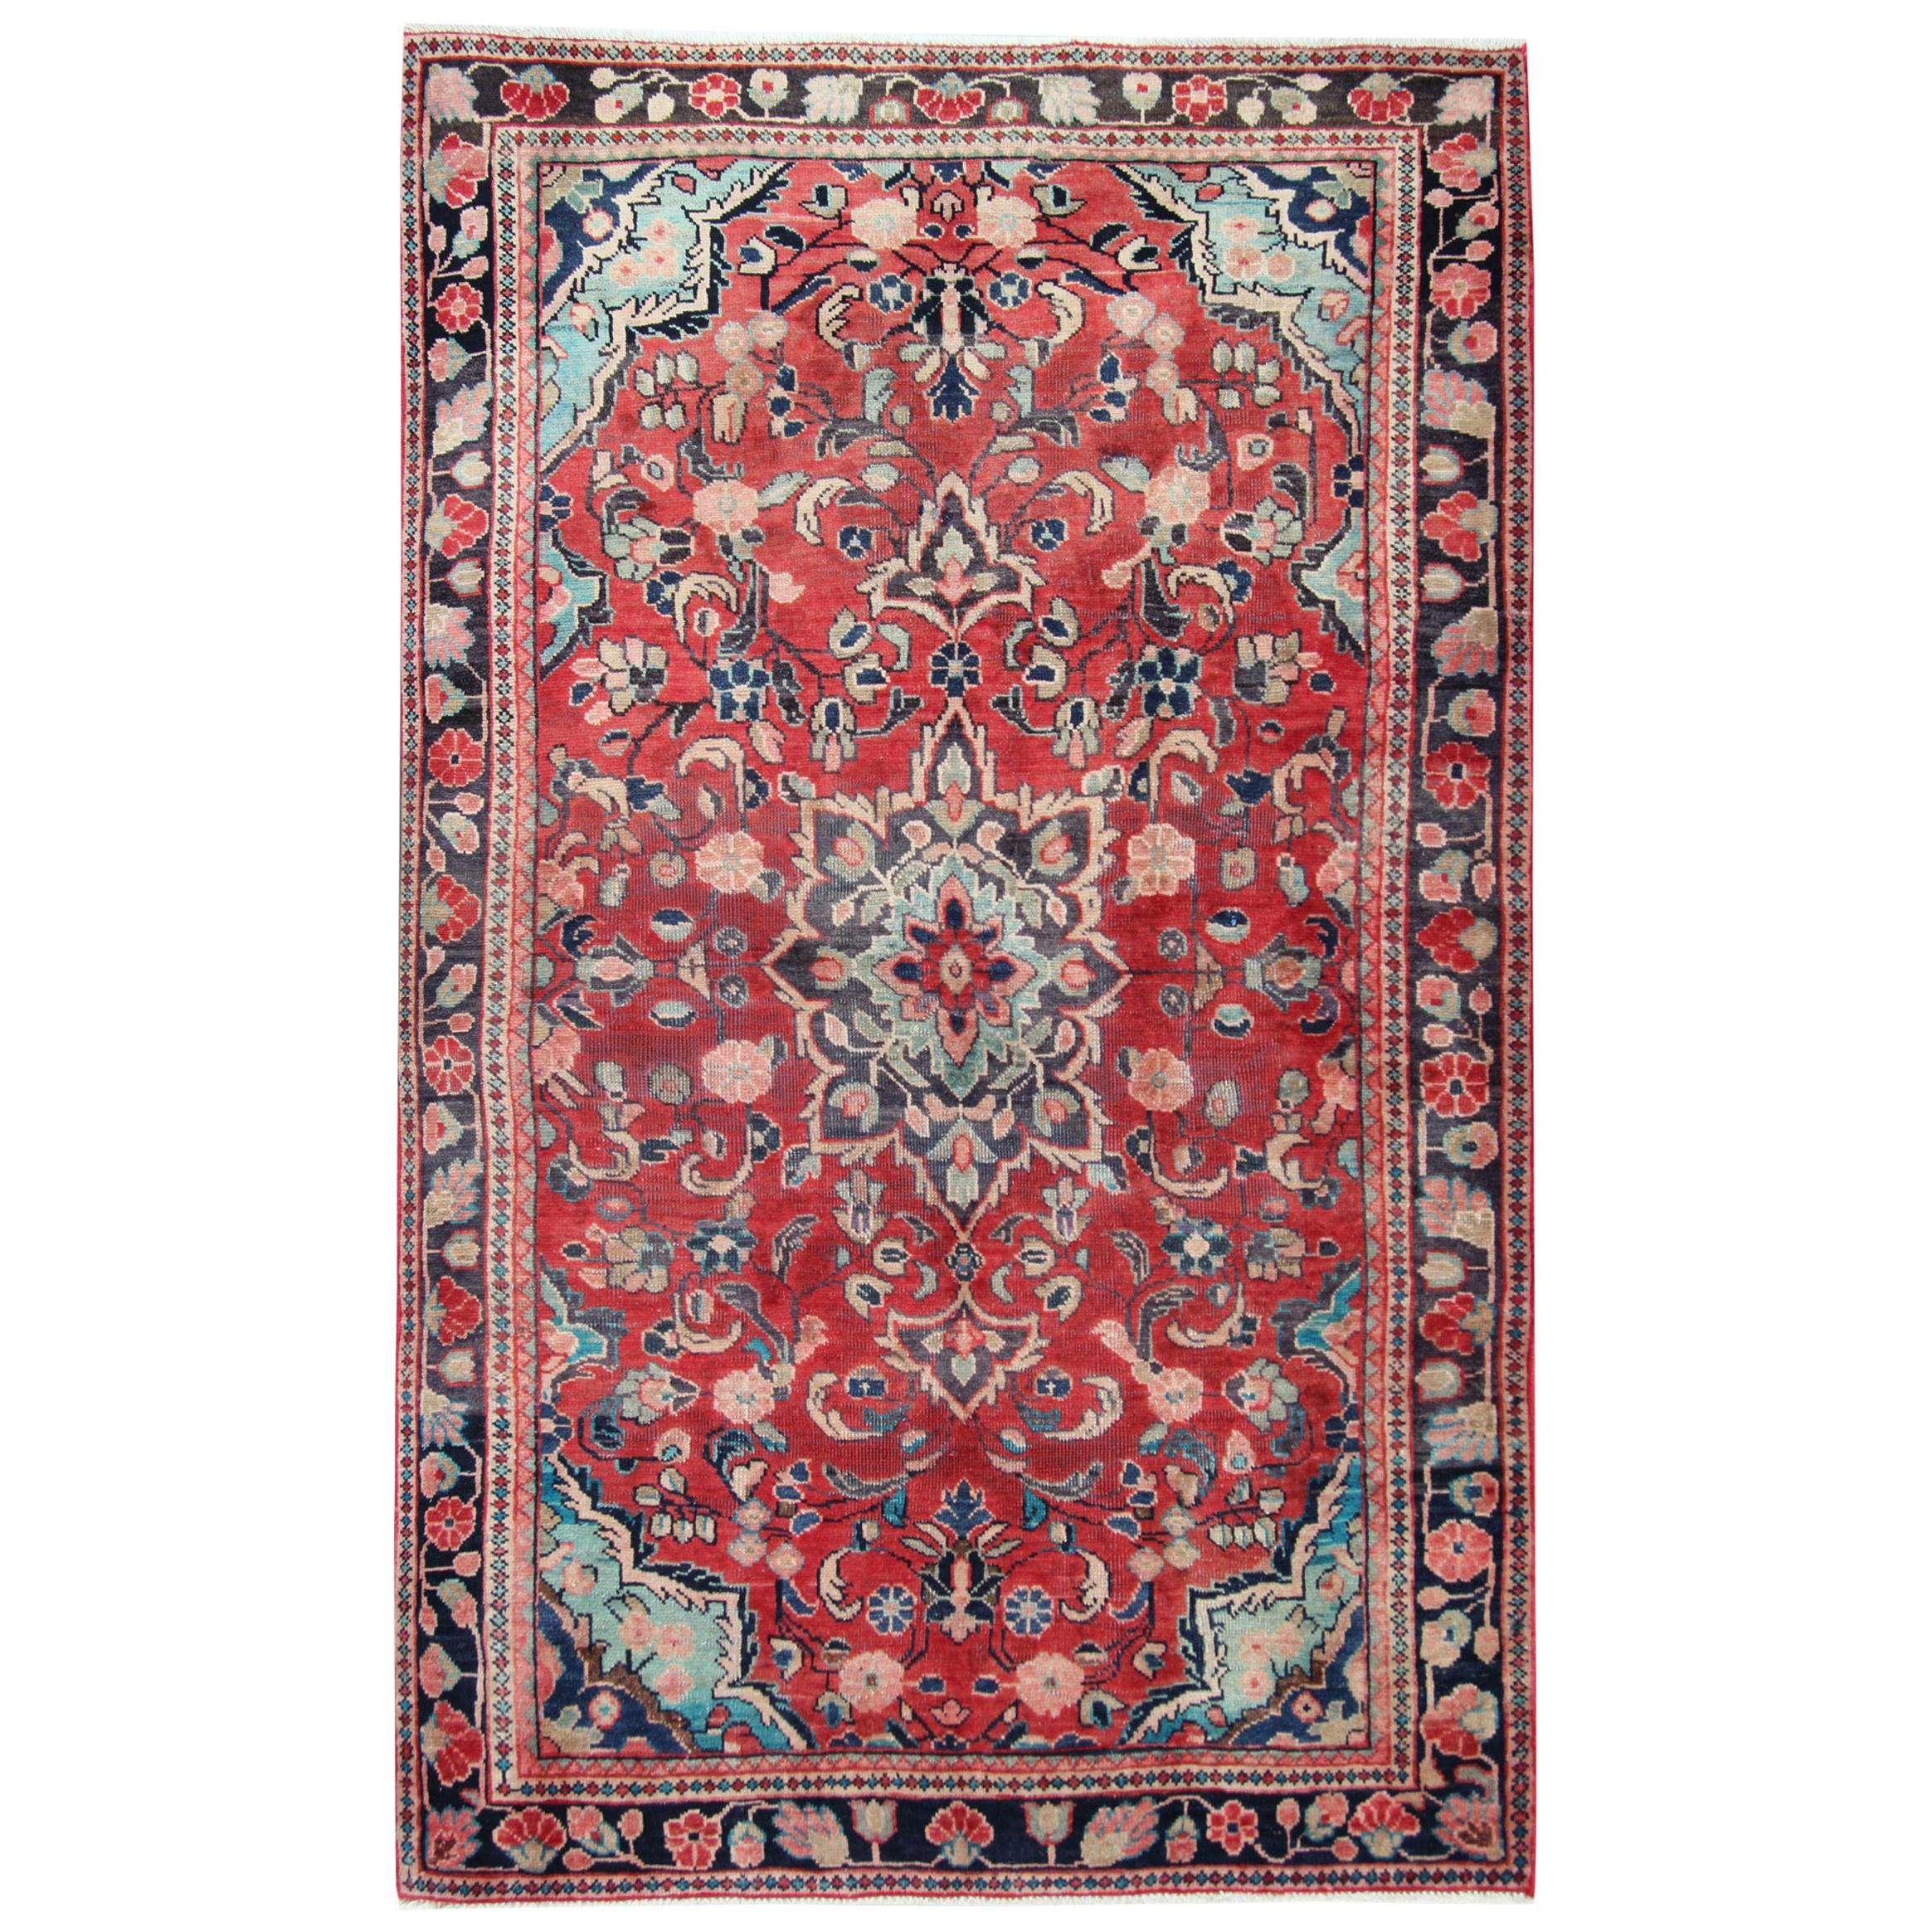 Handwoven Oriental Wool Carpet Traditional Red Medallion Area Rug